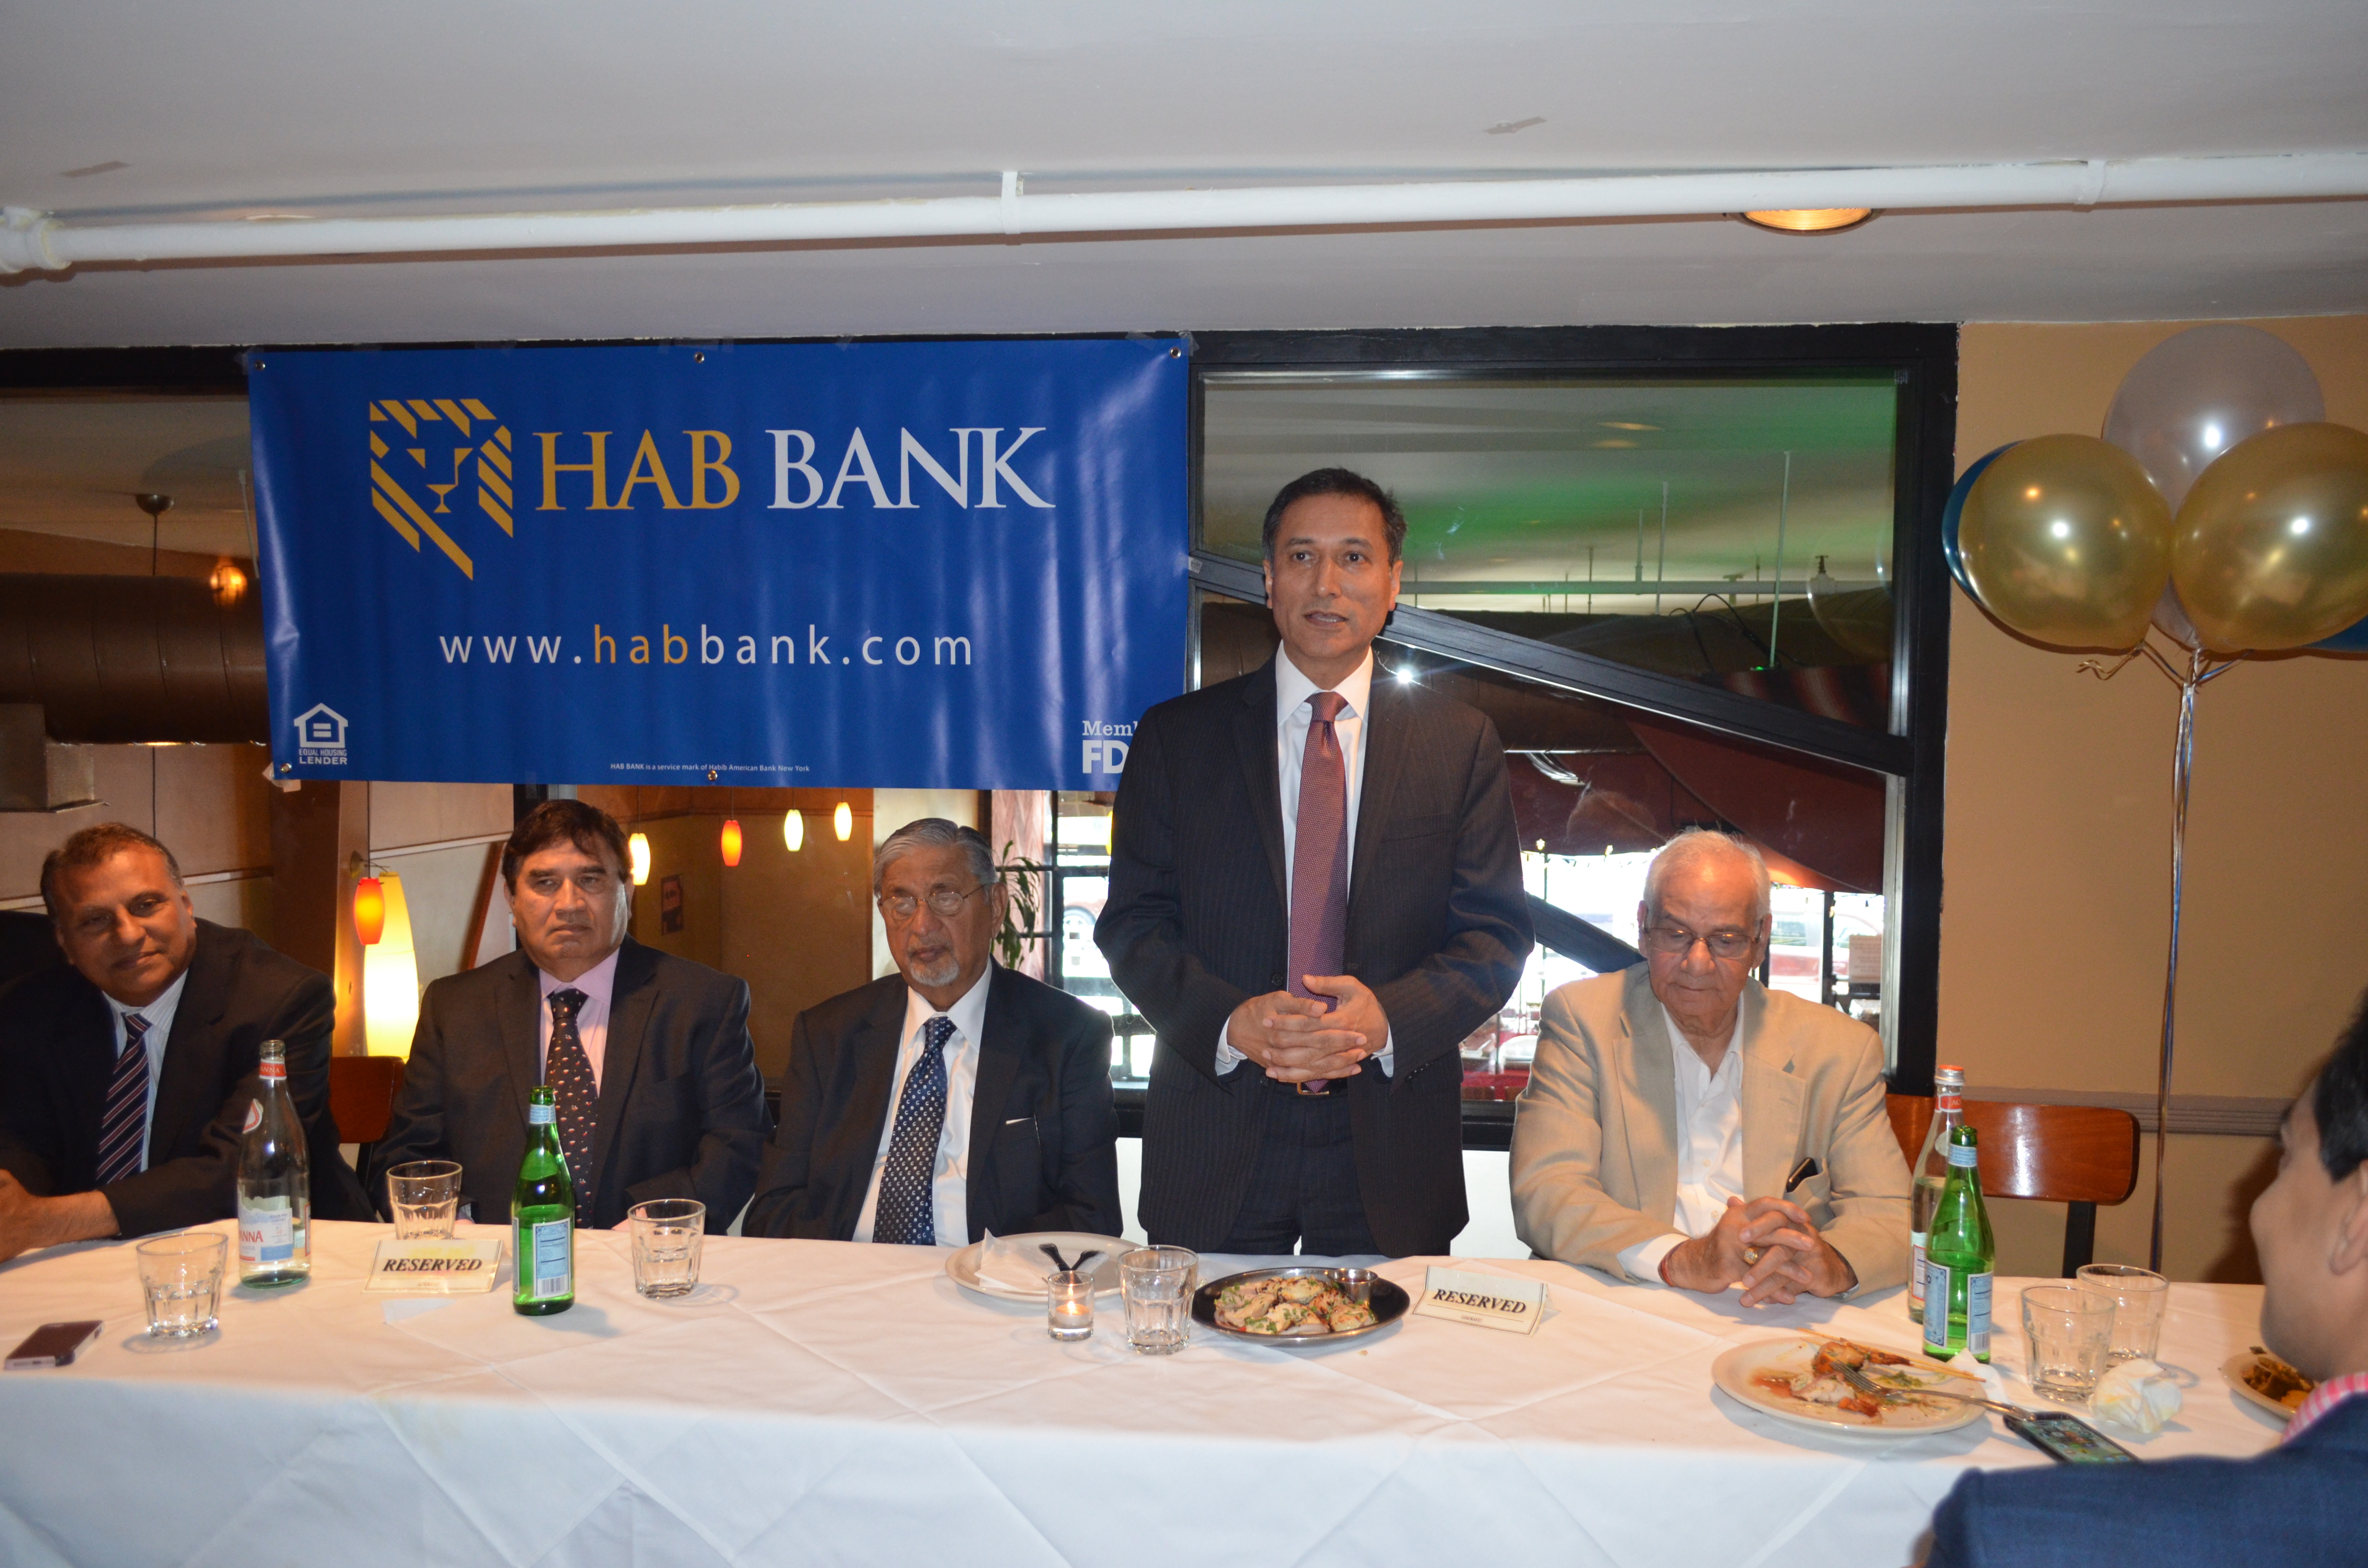 Mr. Saleem Iqbal, President & CEO of HAB BANK welcomed invited guests and said the bank was " proud of successes and achievements that members of our community have been able to attain". Also seen in the picture (extreme right) is Shiv Dass, President , Jackson Heights Merchants' Association